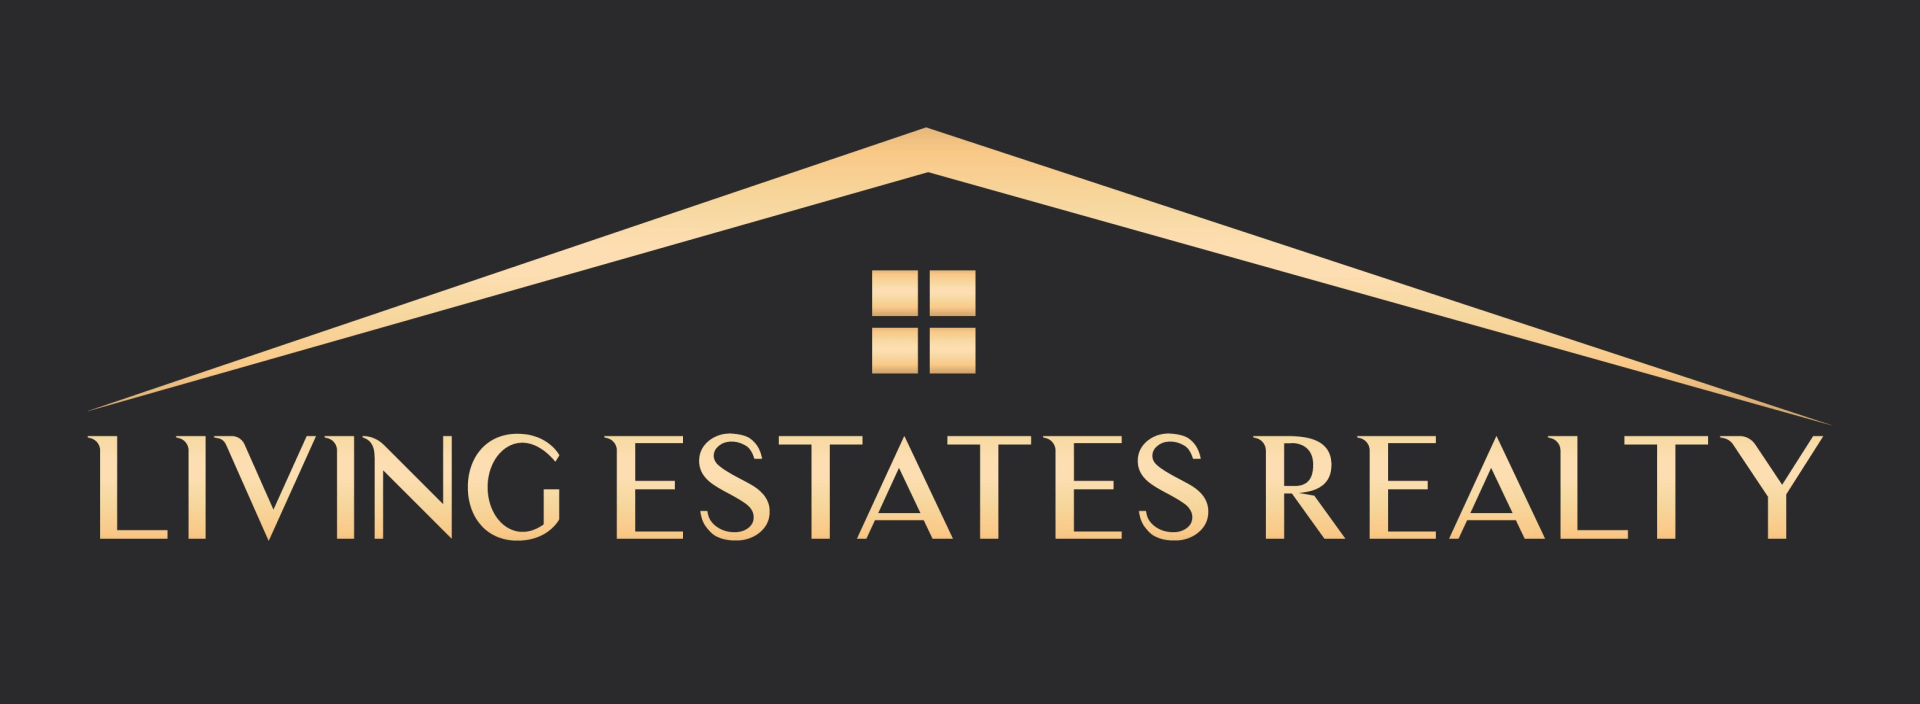 Living Estates Realty Home Ownership, Sales, Leasing and Management